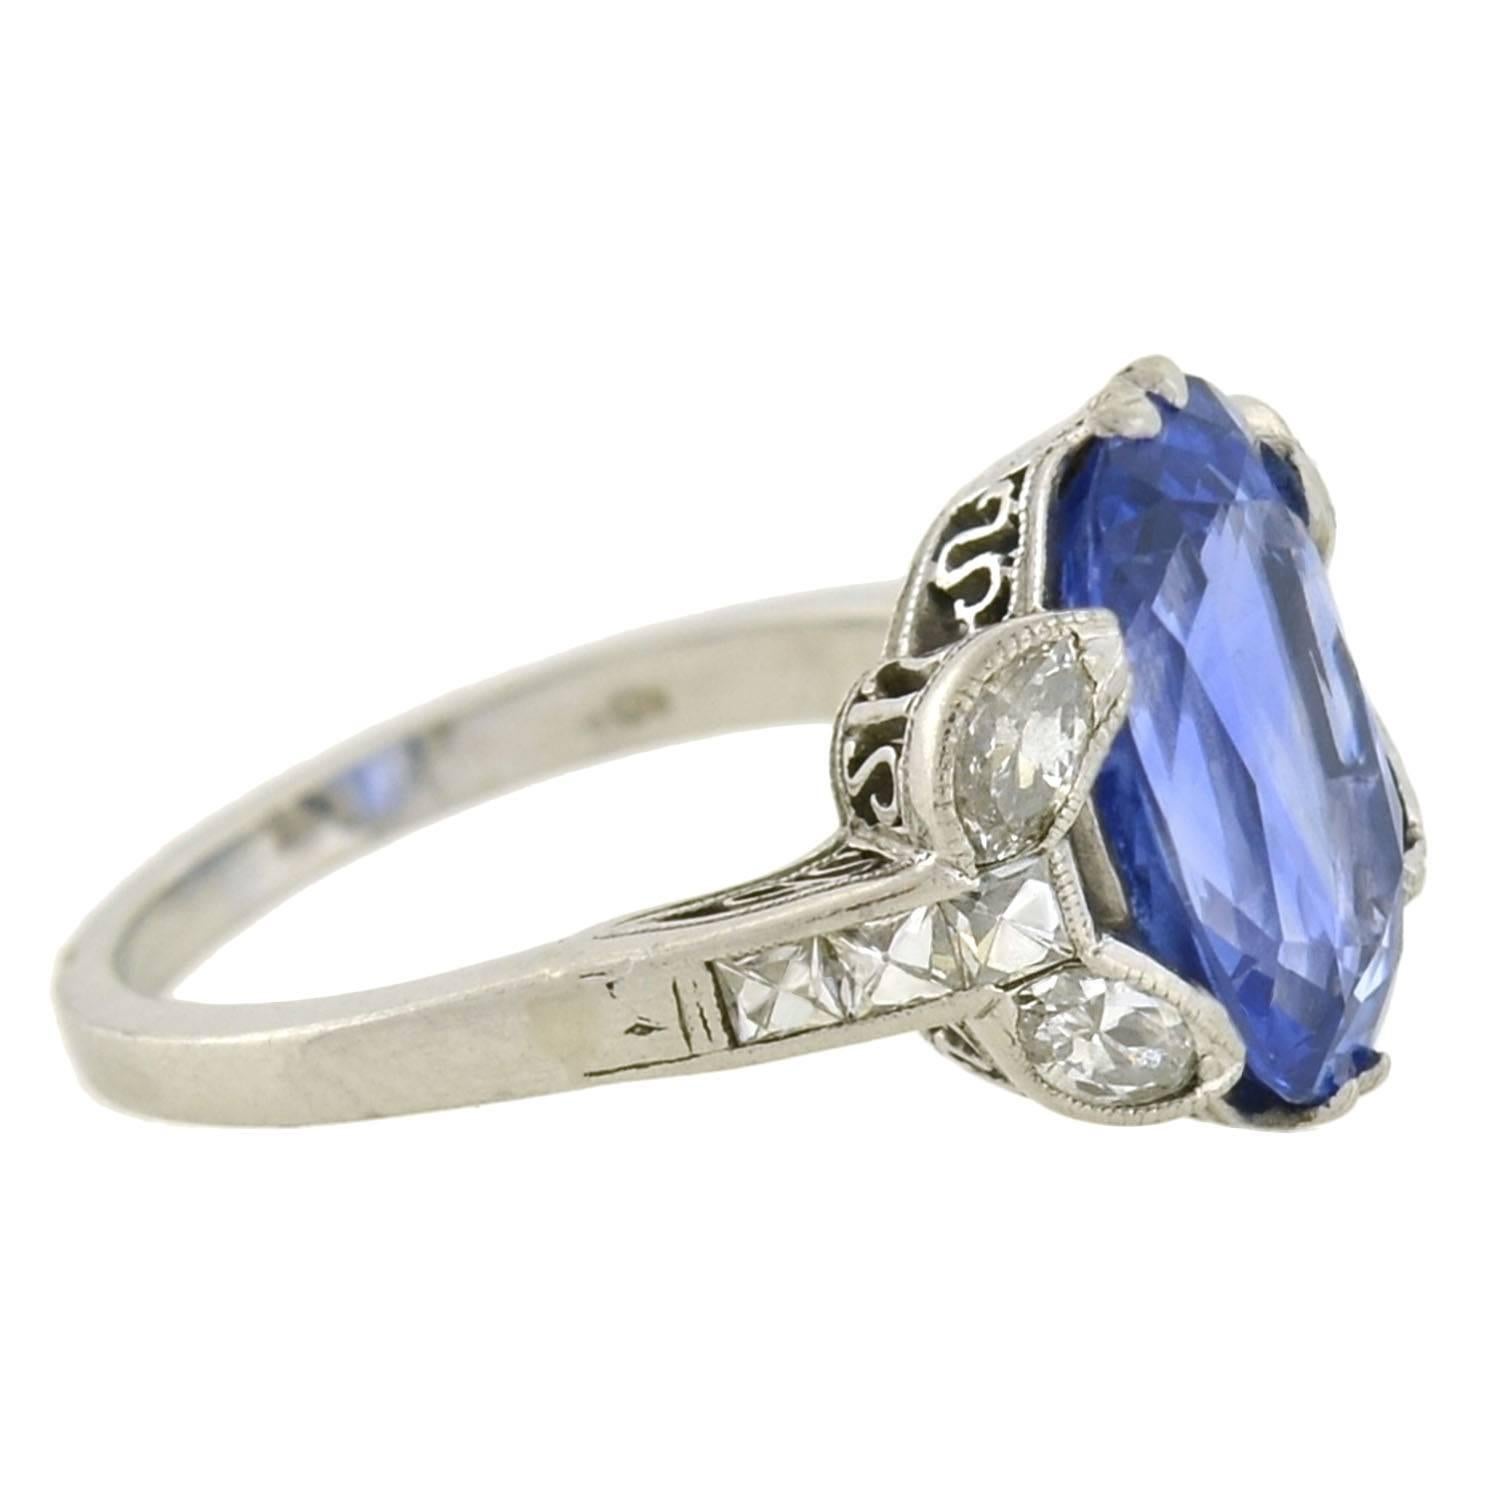 An exquisite sapphire ring from the Art Deco (ca1930s) era! Made of platinum, the ring holds a stunning natural sapphire at the center, framed by sparkling diamonds at either shoulder. The Ceylon (Sri Lankan) sapphire weighs approximately 4.15ct,